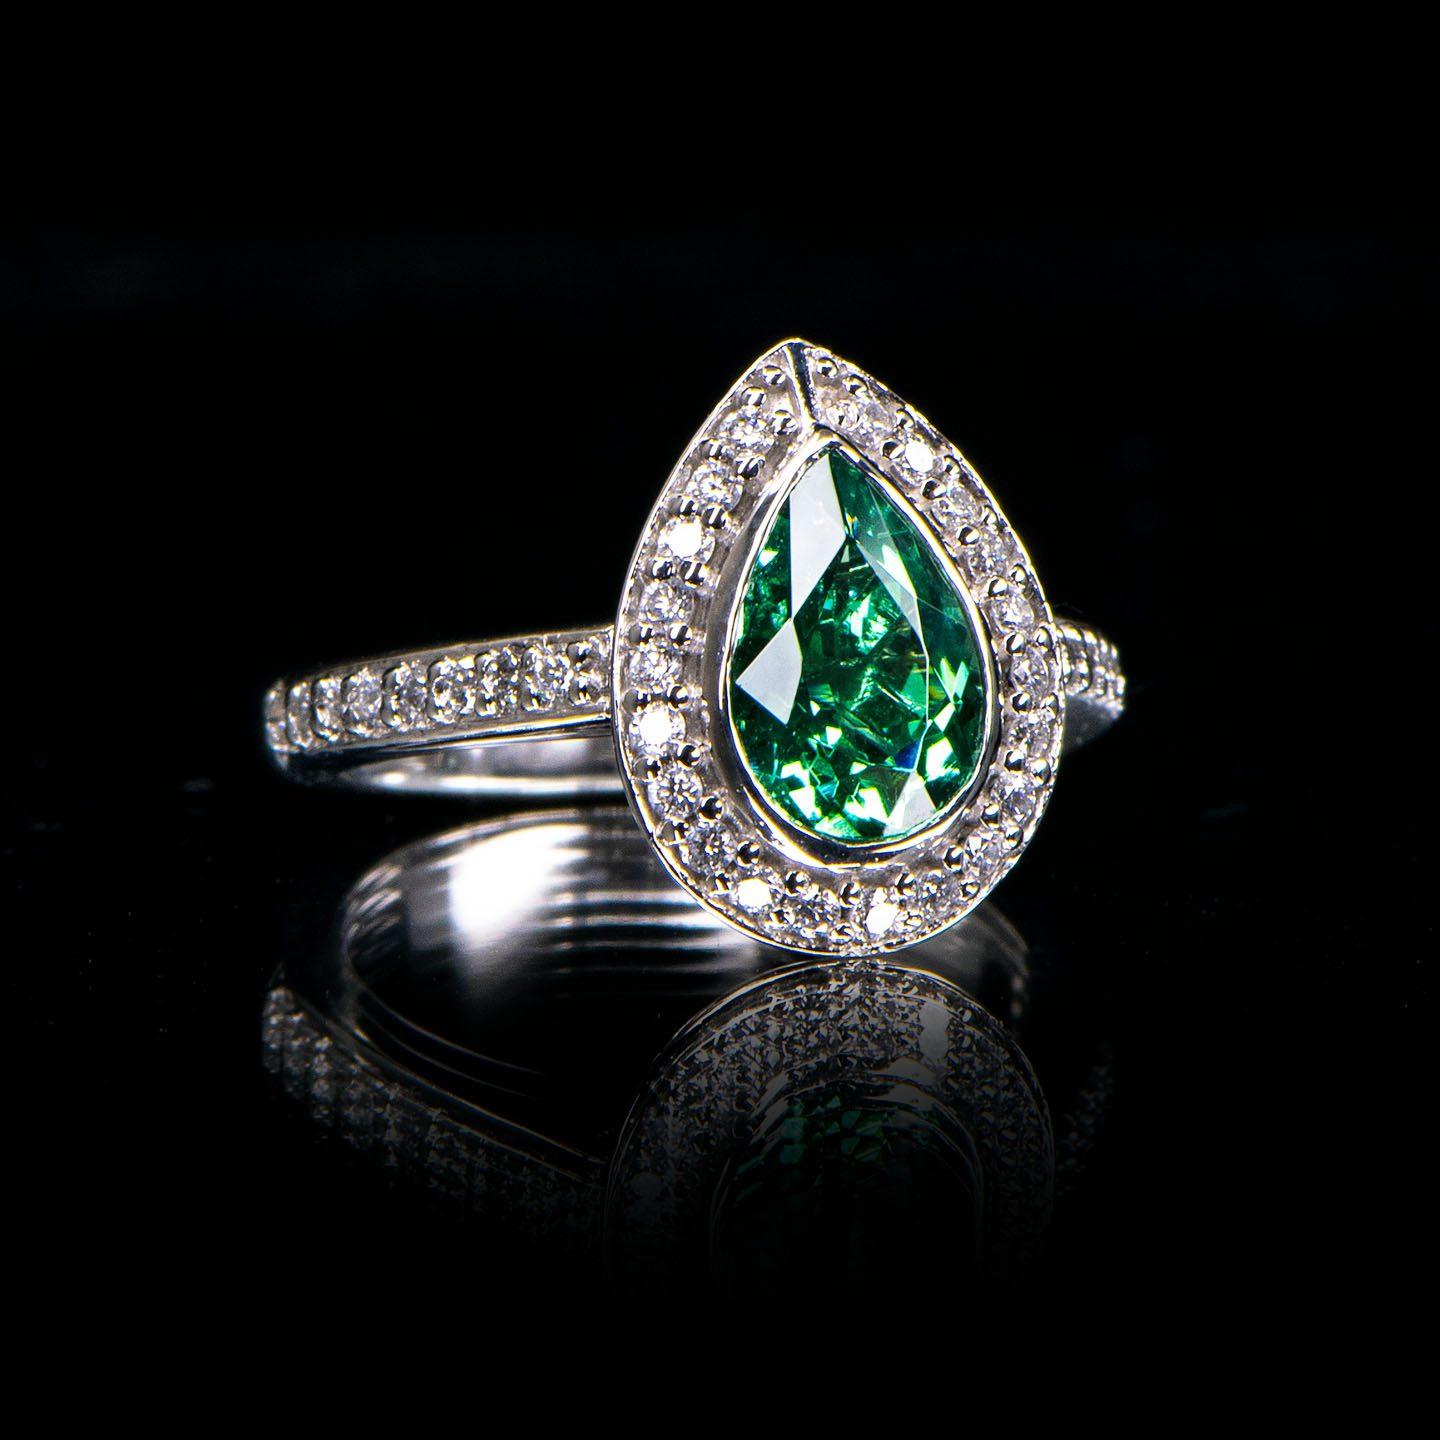 This handcrafted vintage style ring features a 1.94 carat pear cut green Tourmaline in a grain set cluster (halo) setting. The setting is elegantly flanked with a grain set diamond band. The total diamond weight is 0.38 carat (Colour F, Clarity VS).